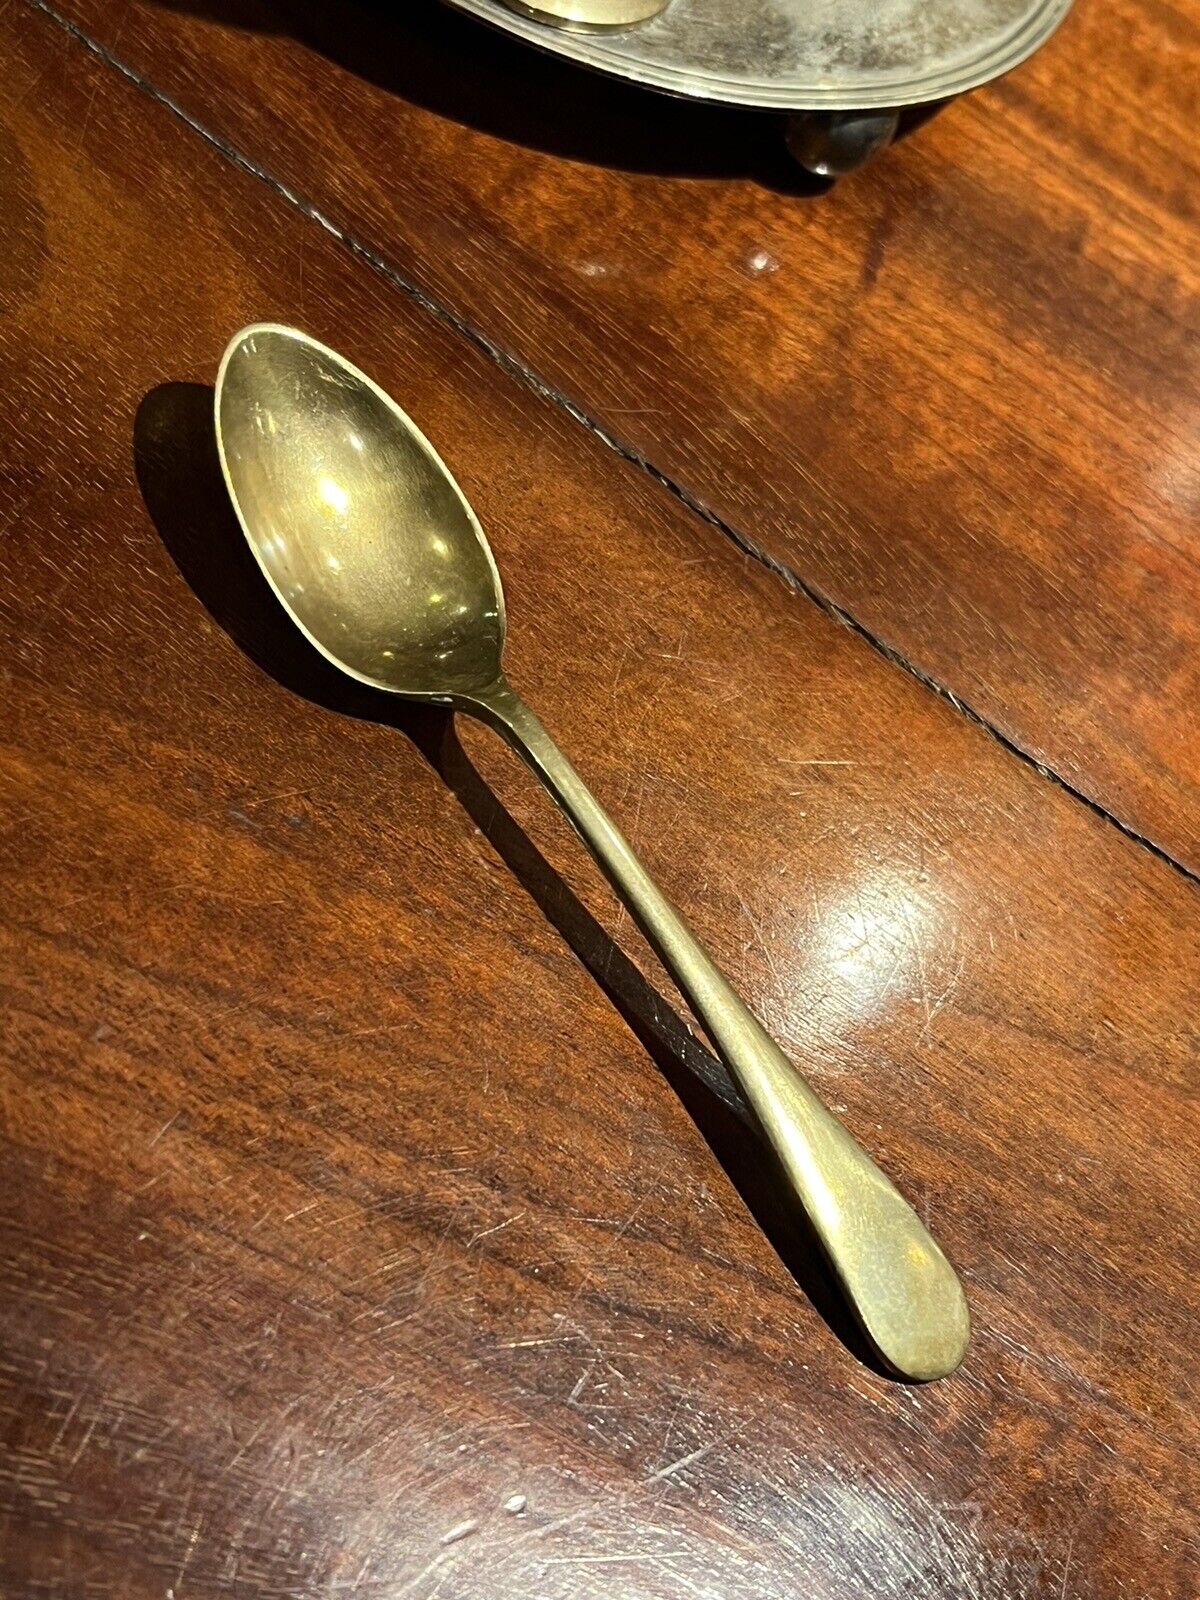 Antique Silver Plate Egg Cup & Spoon Set